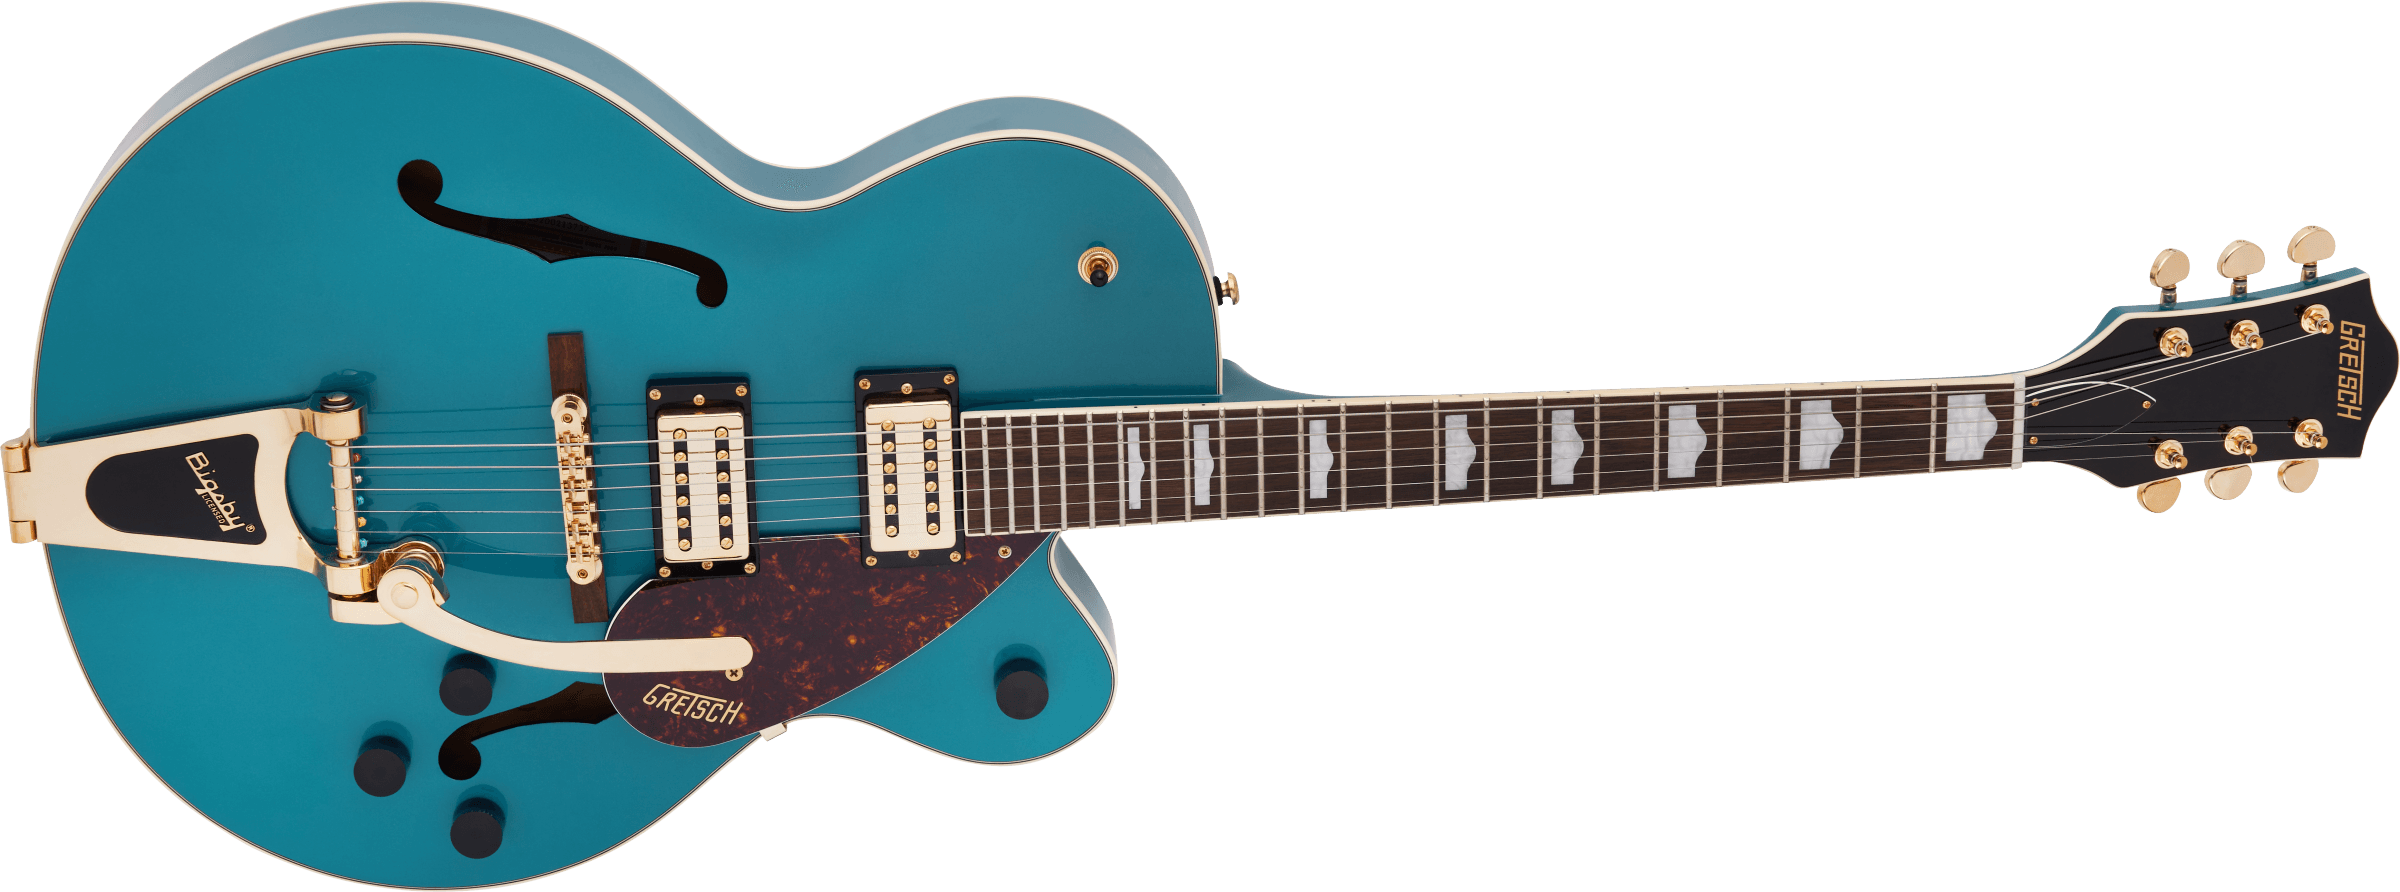 G2410TG Streamliner Hollow Body Single-Cut with Bigsby and Gold Hardware, Laurel Fingerboard, Ocean Turquoise追加画像